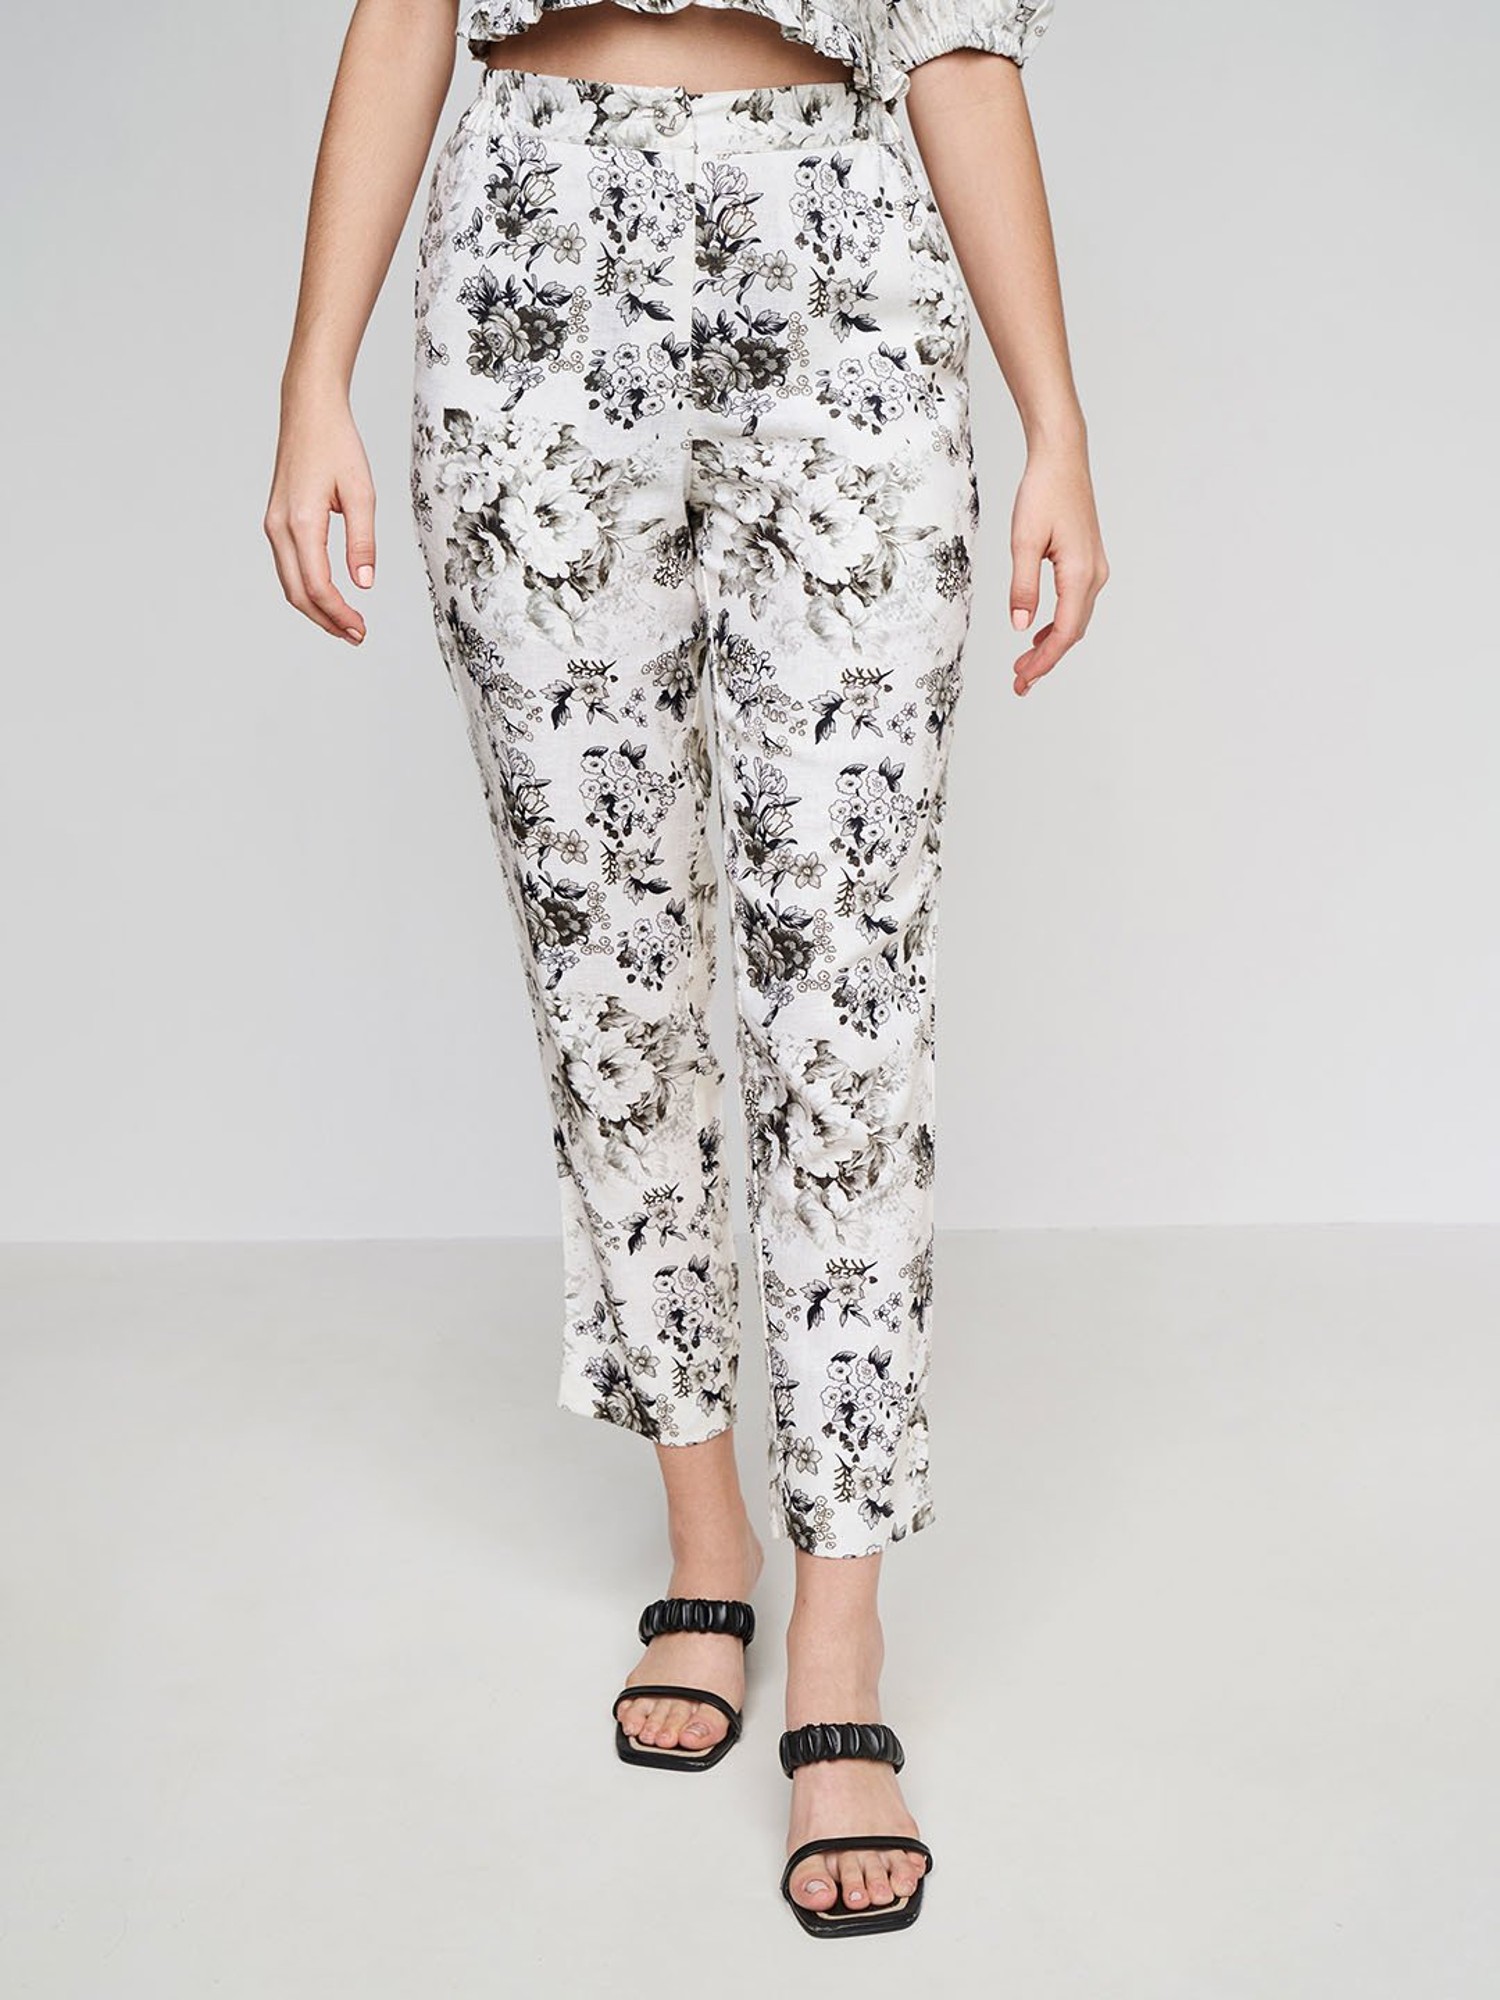 Buy AND White & Black Floral Print Pants for Women Online @ Tata CLiQ